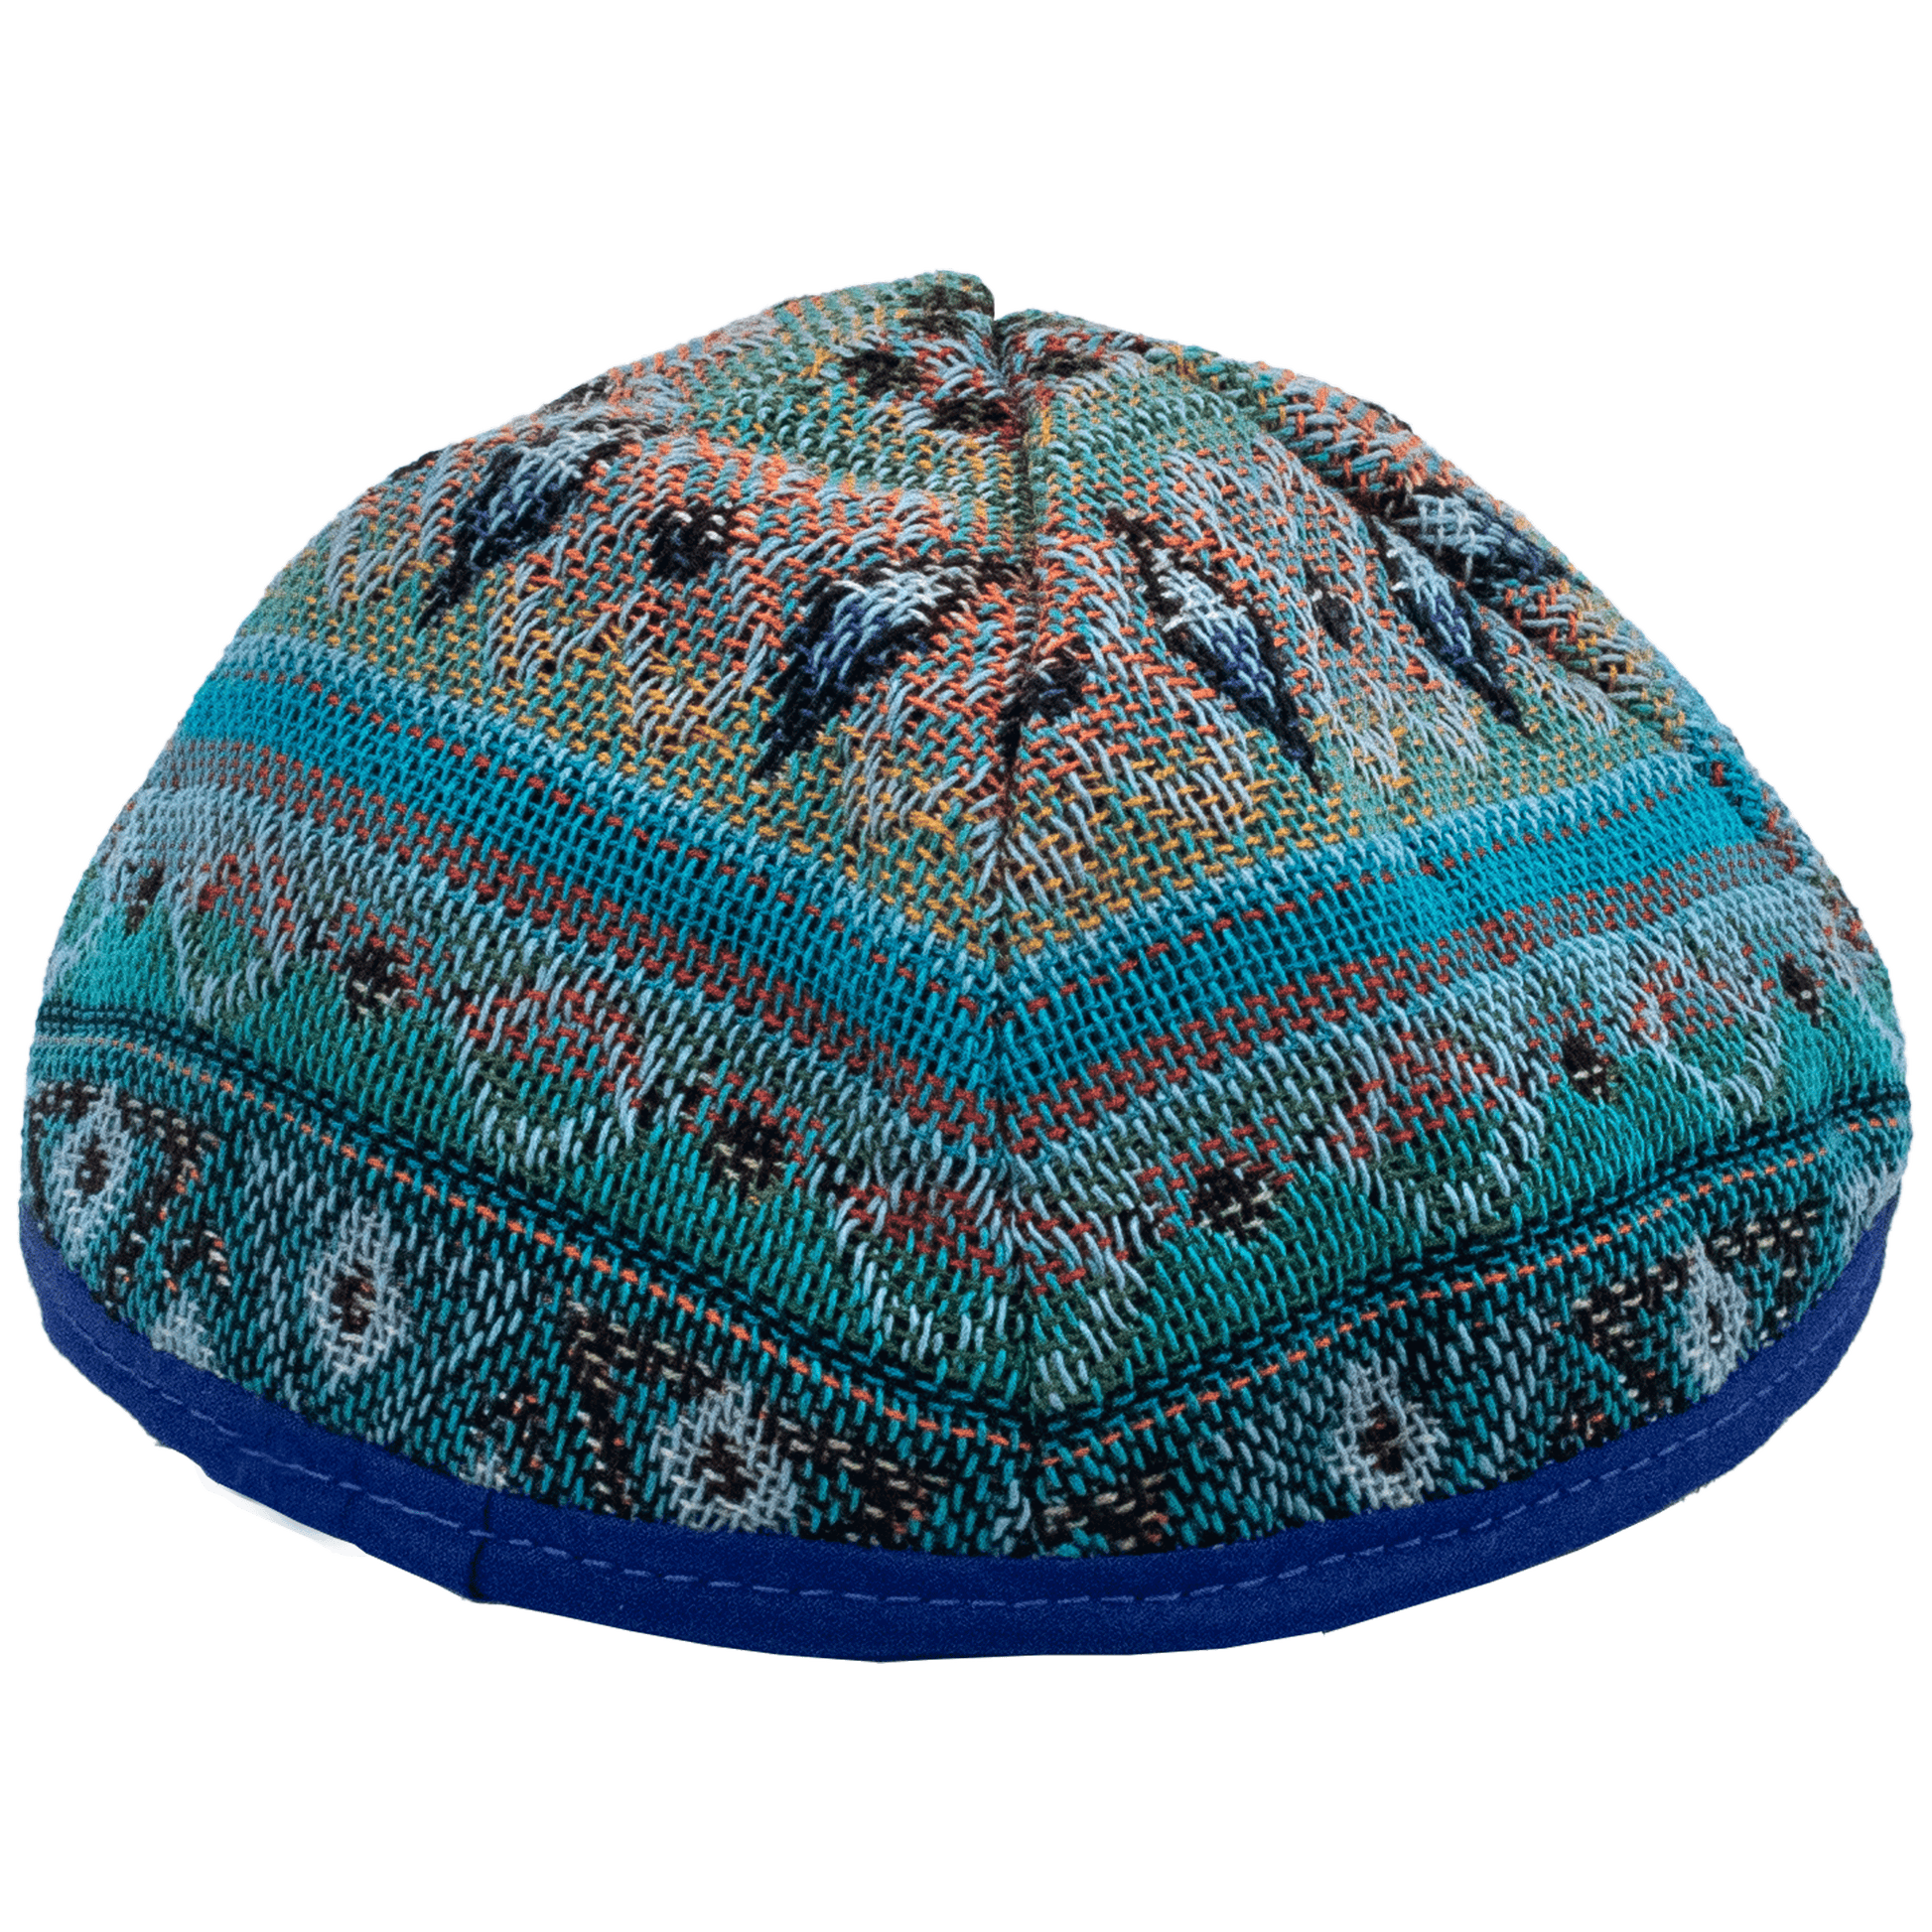 Turquoise Kippah with Diamond and floral designs